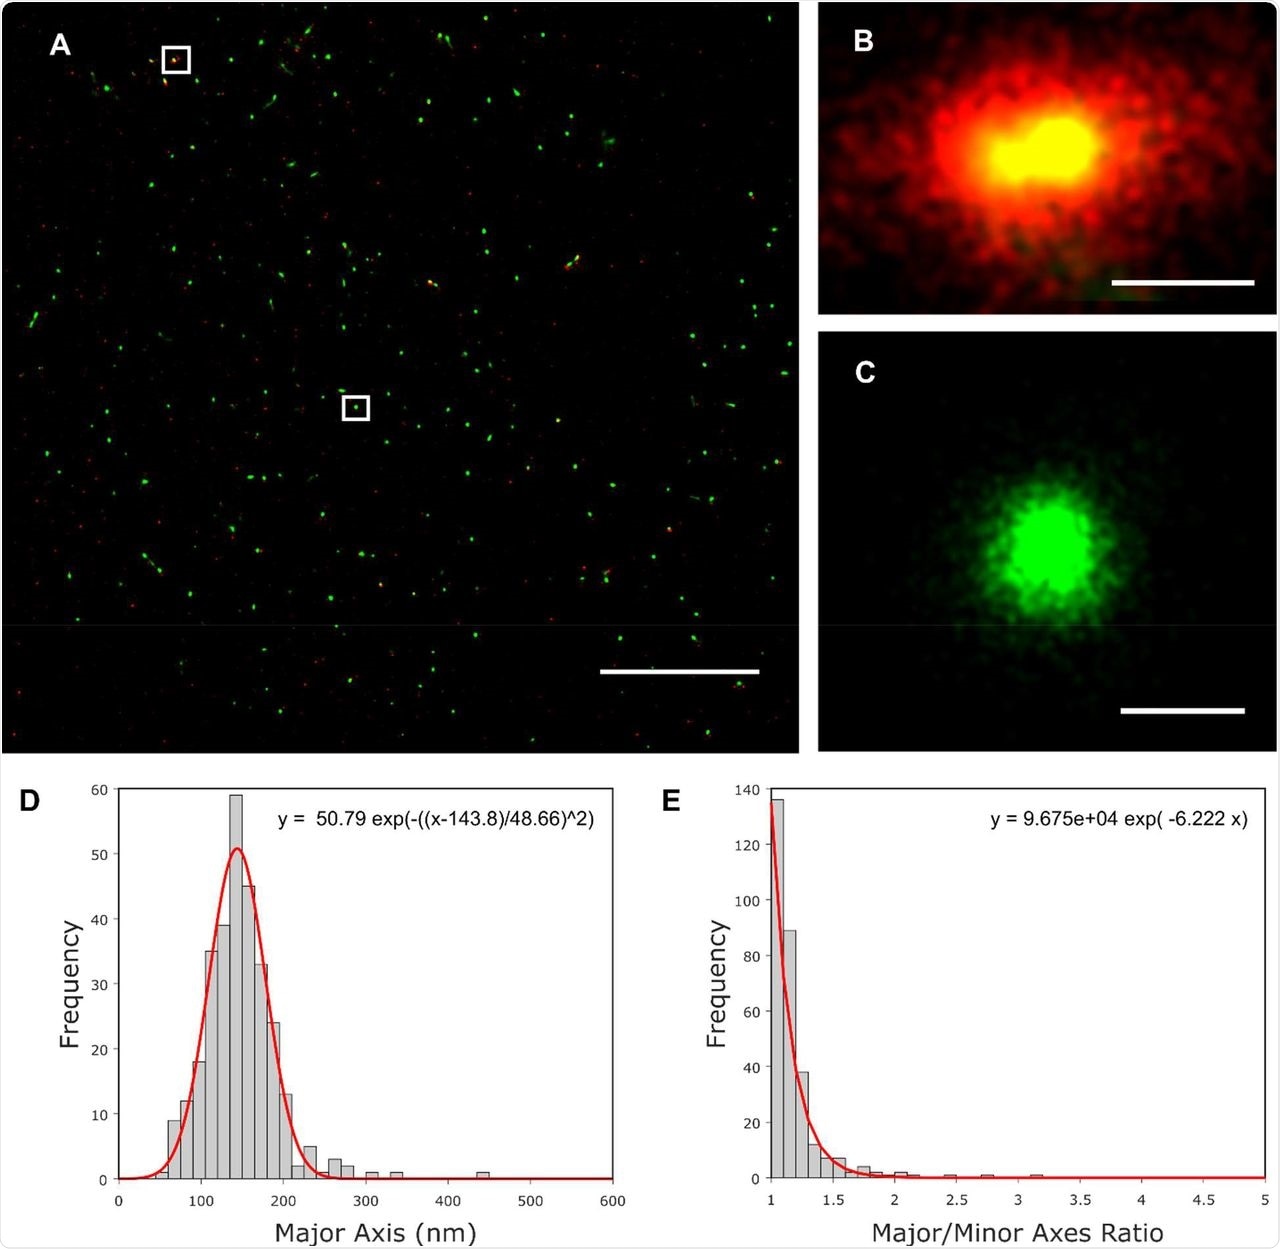 Super-resolution imaging and size analysis of SARS-CoV-2 virus particles. A) A representative super-resolution image of SARS-CoV-2 virions dual-labelled with anti-spike and anti-nucleoprotein (N) primary antibodies and secondary antibodies labelled with Alexa647 (red) and Alexa546 (green) respectively. Scale bar 10 µm. B&C) Zoomed images of individual SARS-CoV-2 particles (highlighted in the white boxes in A). Scale bar 100 nm. D) Super-resolution localisations in the green channel (labelling the N protein) were clustered and each cluster fitted with an ellipse to extract particle dimensions. A histogram of the major axis lengths fitted with a Gaussian function shows that virions fall into a single population, centred at 143.8nm. E) Histogram of the major/minor axis ratio shows a single distribution.